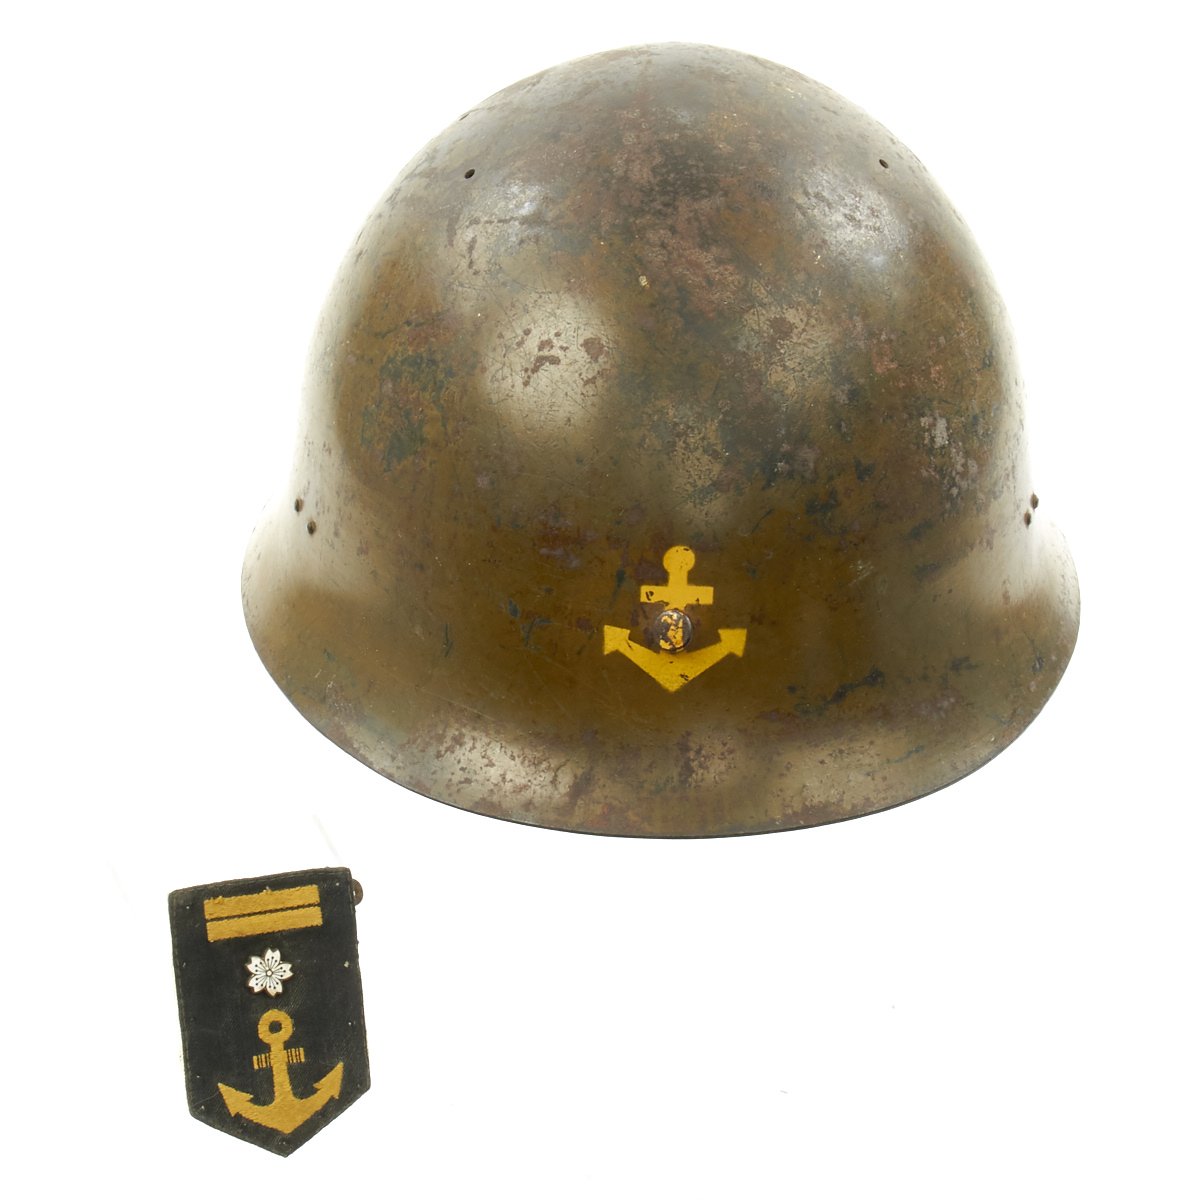 Original Wwii Japanese Special Naval Landing Forces Snlf Helmet With Uniform Insignia International Military Antiques